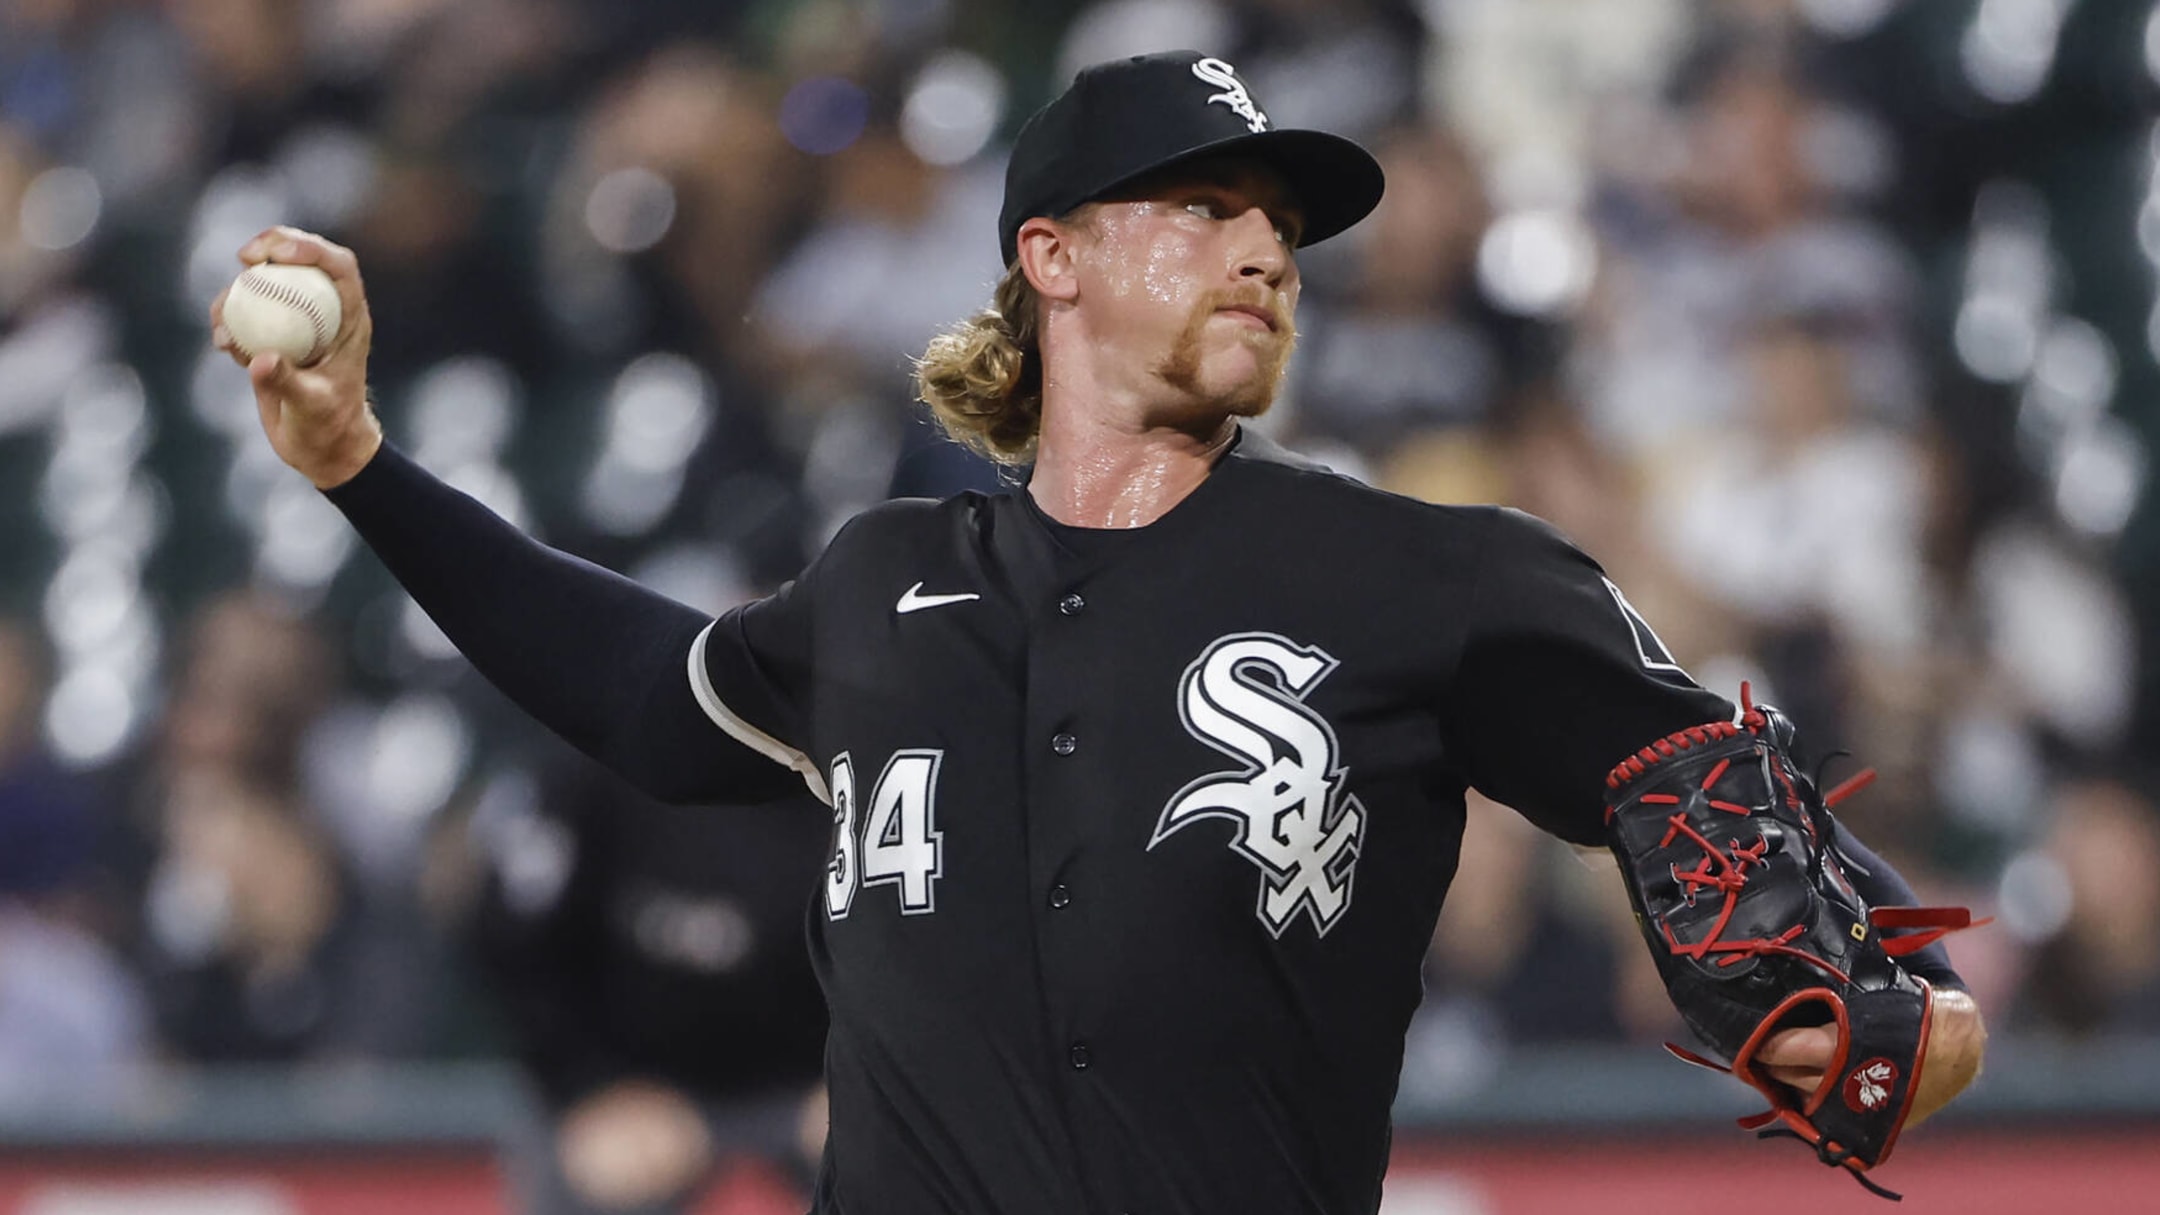 Cardinals 4, White Sox 3: A fitting end to the first half